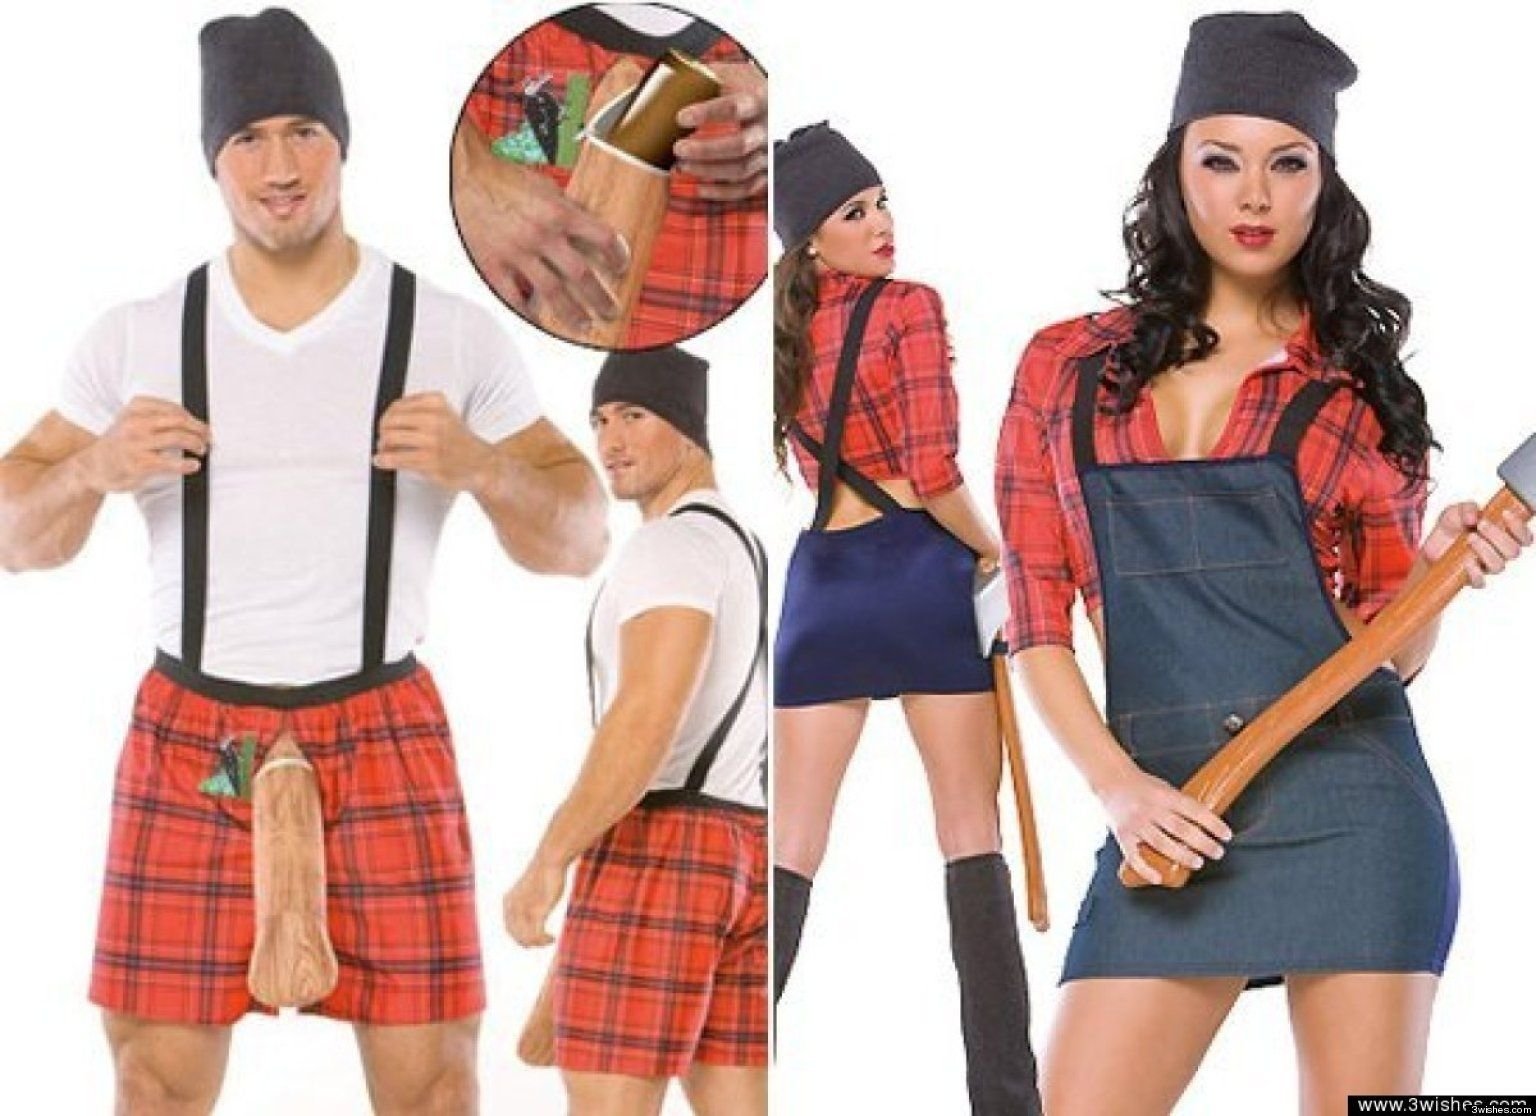 10 Wonderful Good Couple Halloween Costume Ideas look 5 extremely awkward couples costumes costumes couple 1 2022